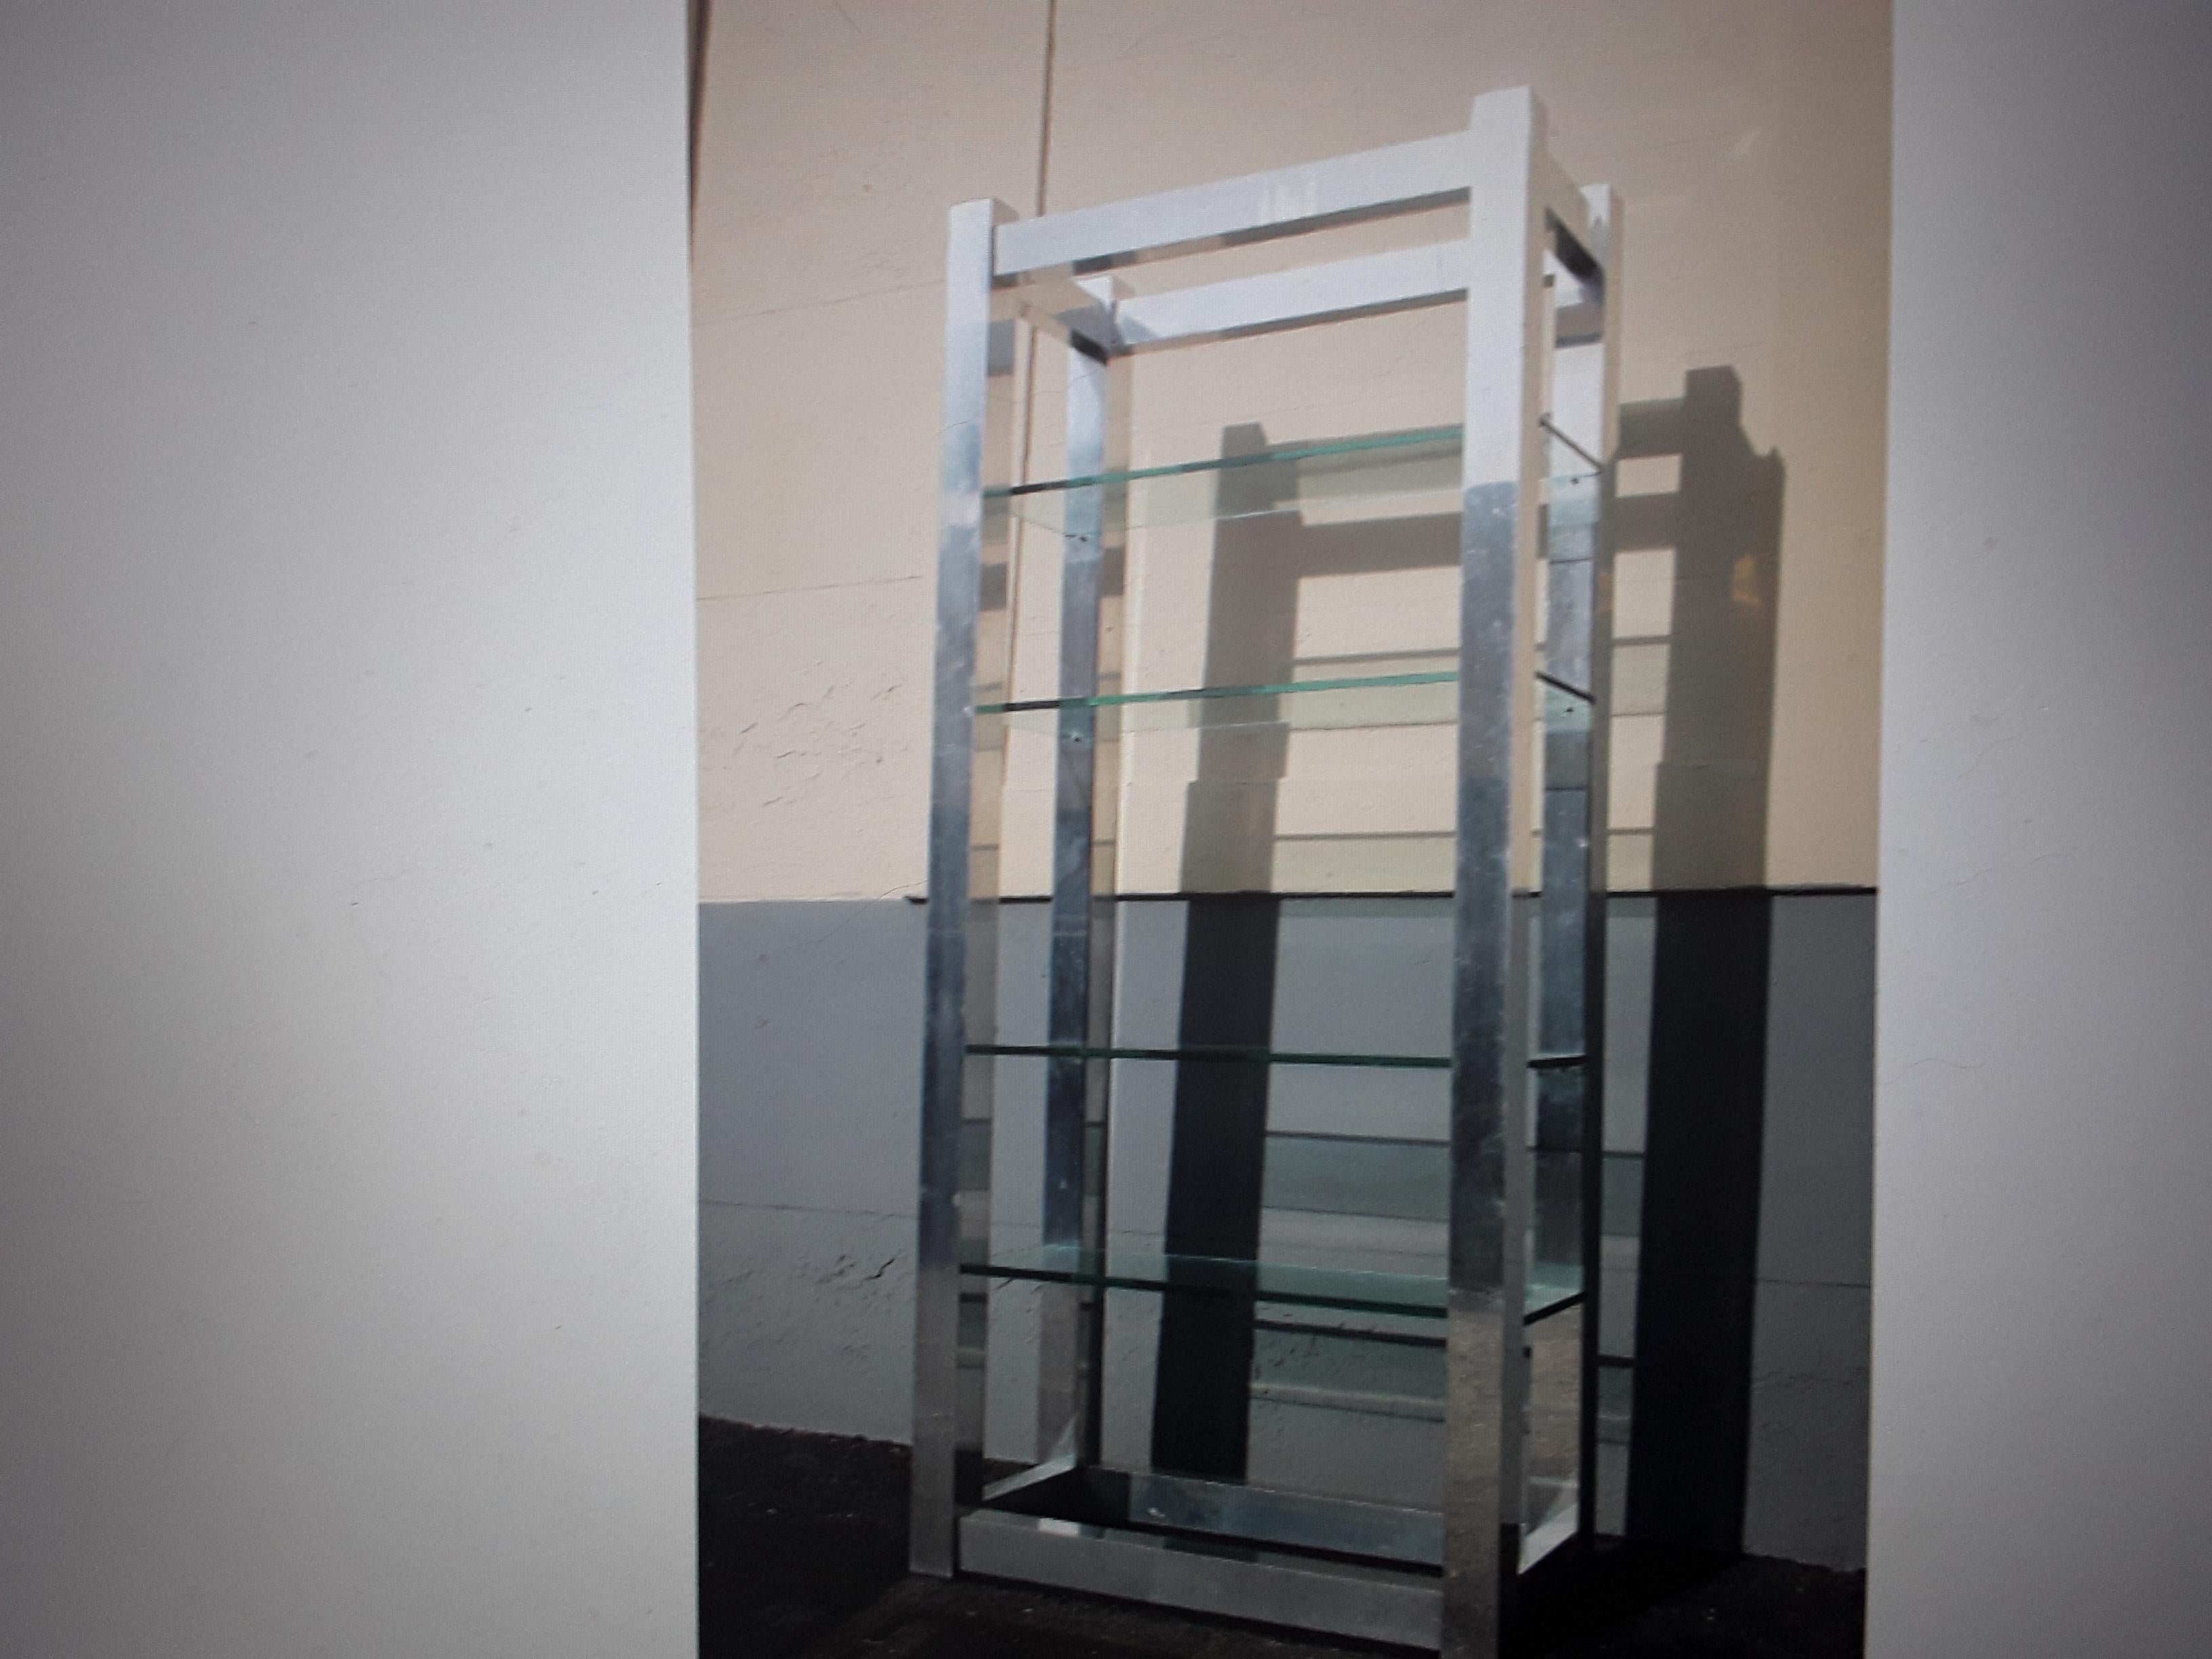 1970's Modern Silver Chrome Finish Metal 6 Shelf Etagere Wall Cabinet In Good Condition For Sale In Opa Locka, FL